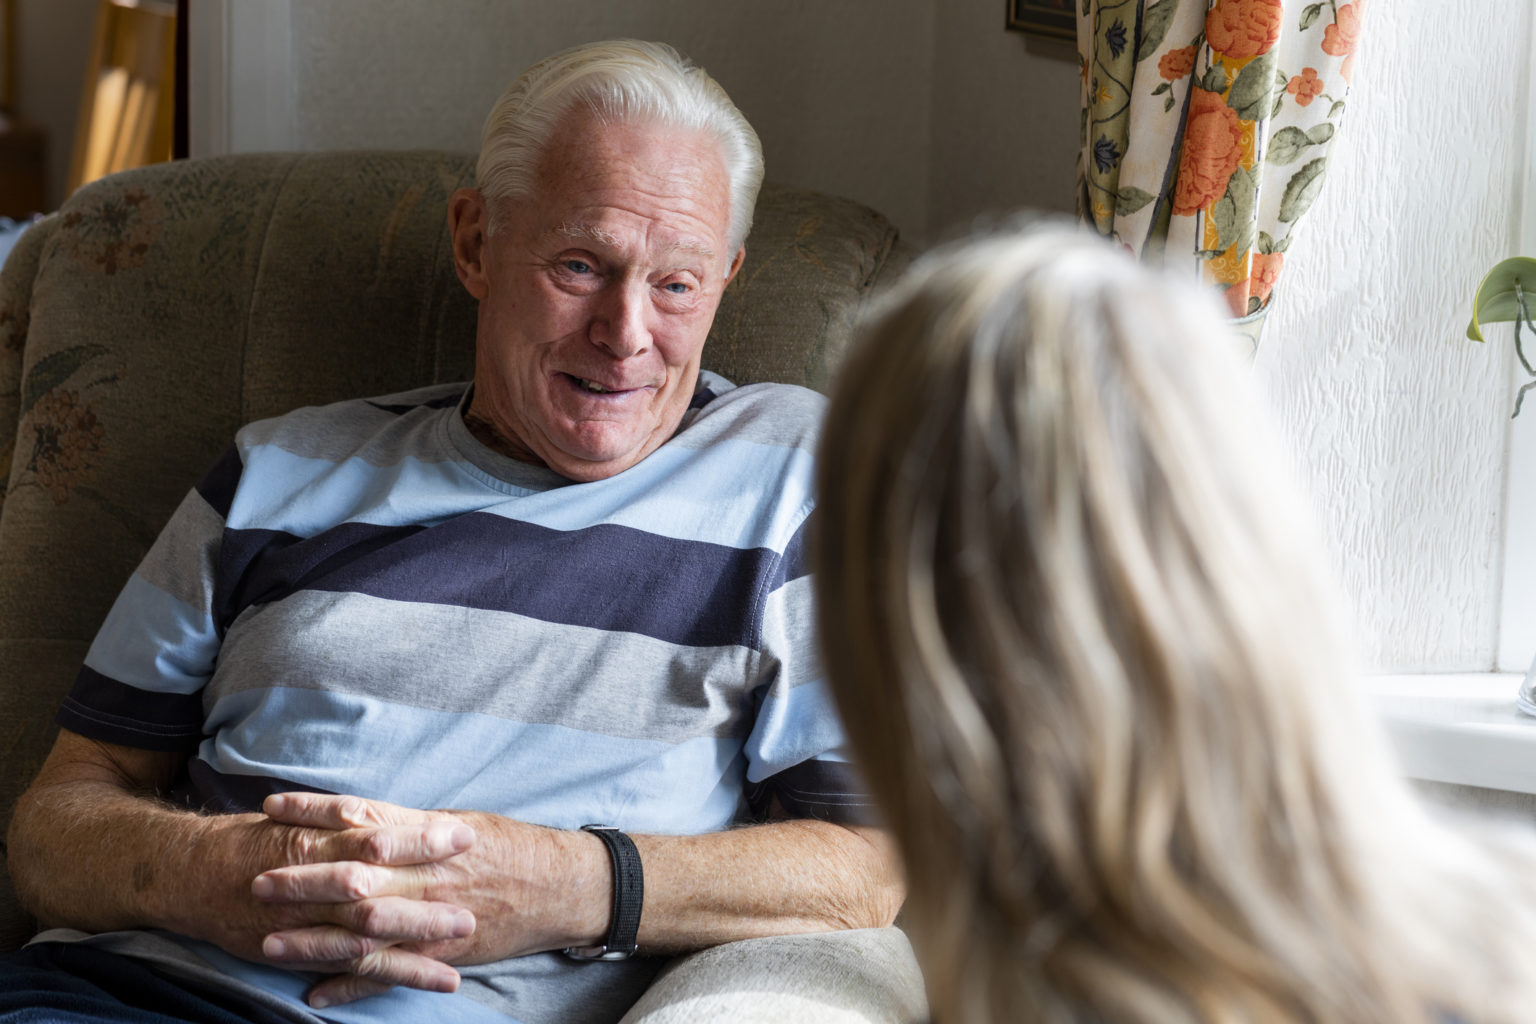 Nurse conversing with a senior patient in the North East of England while he is sitting in a chair in his living room.